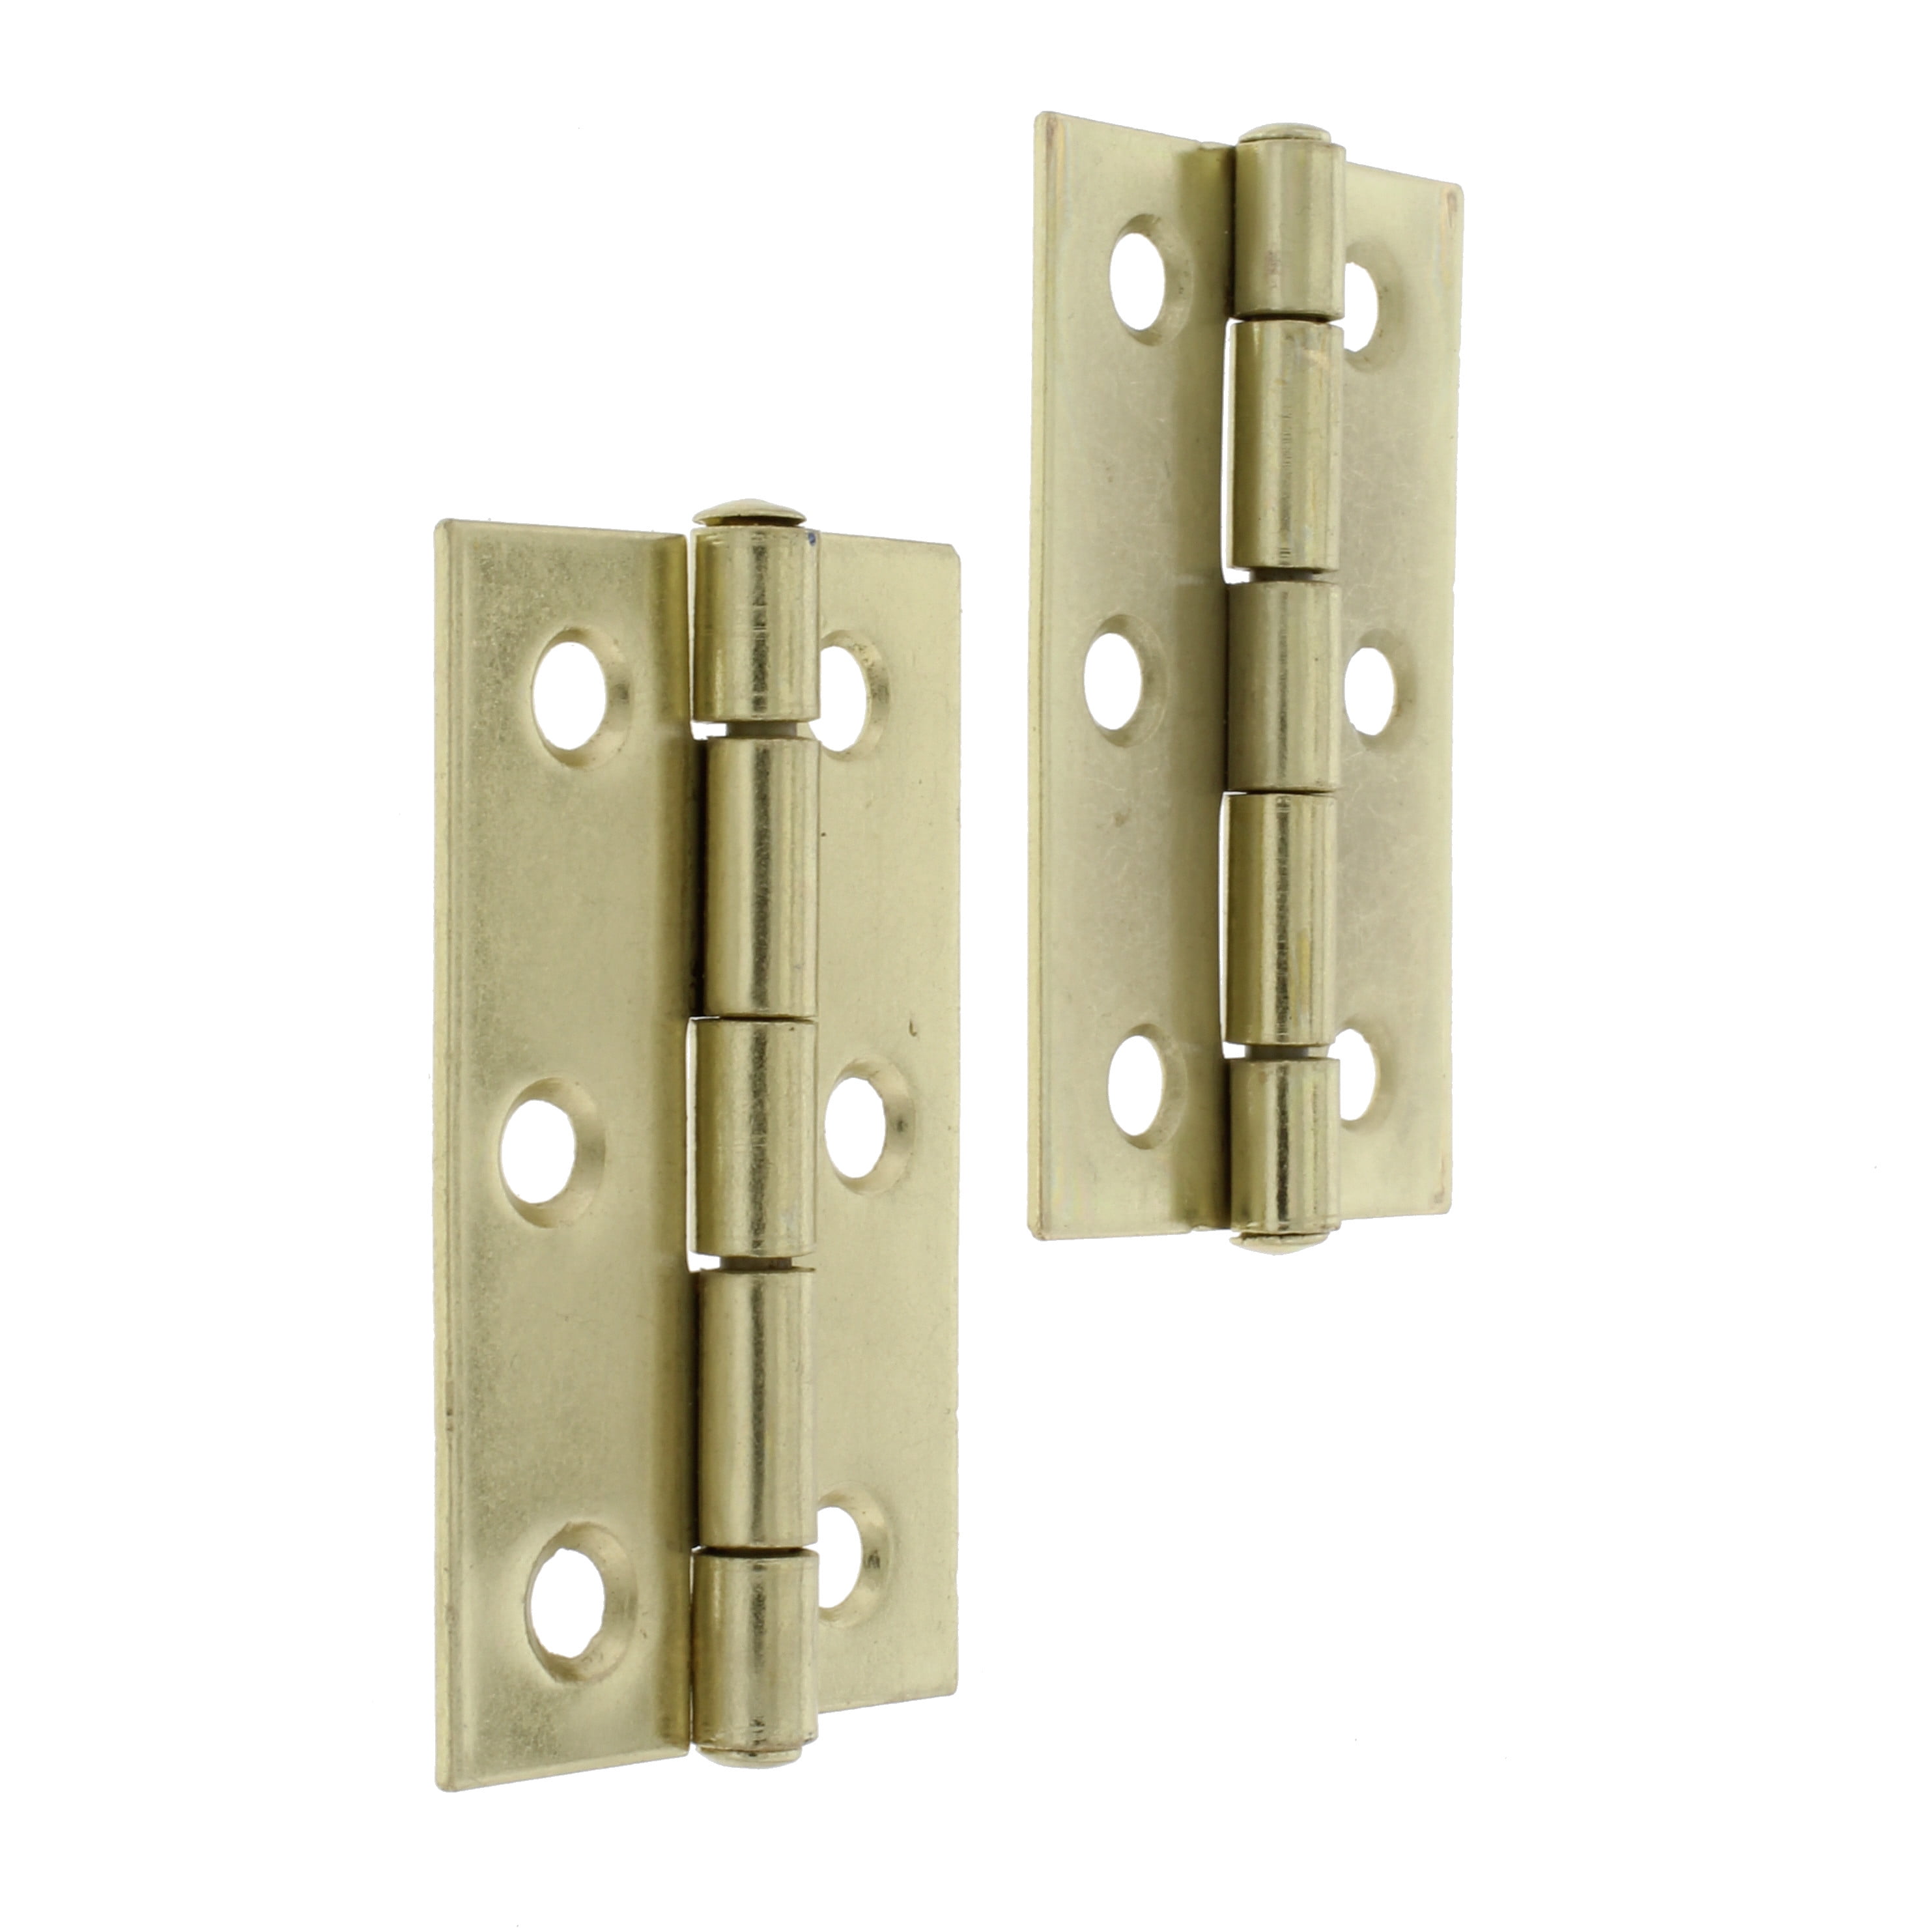 8 Pack  S/2 2" UTILITY HINGES Security Doors Gates Storage Brass Plated Hardware 